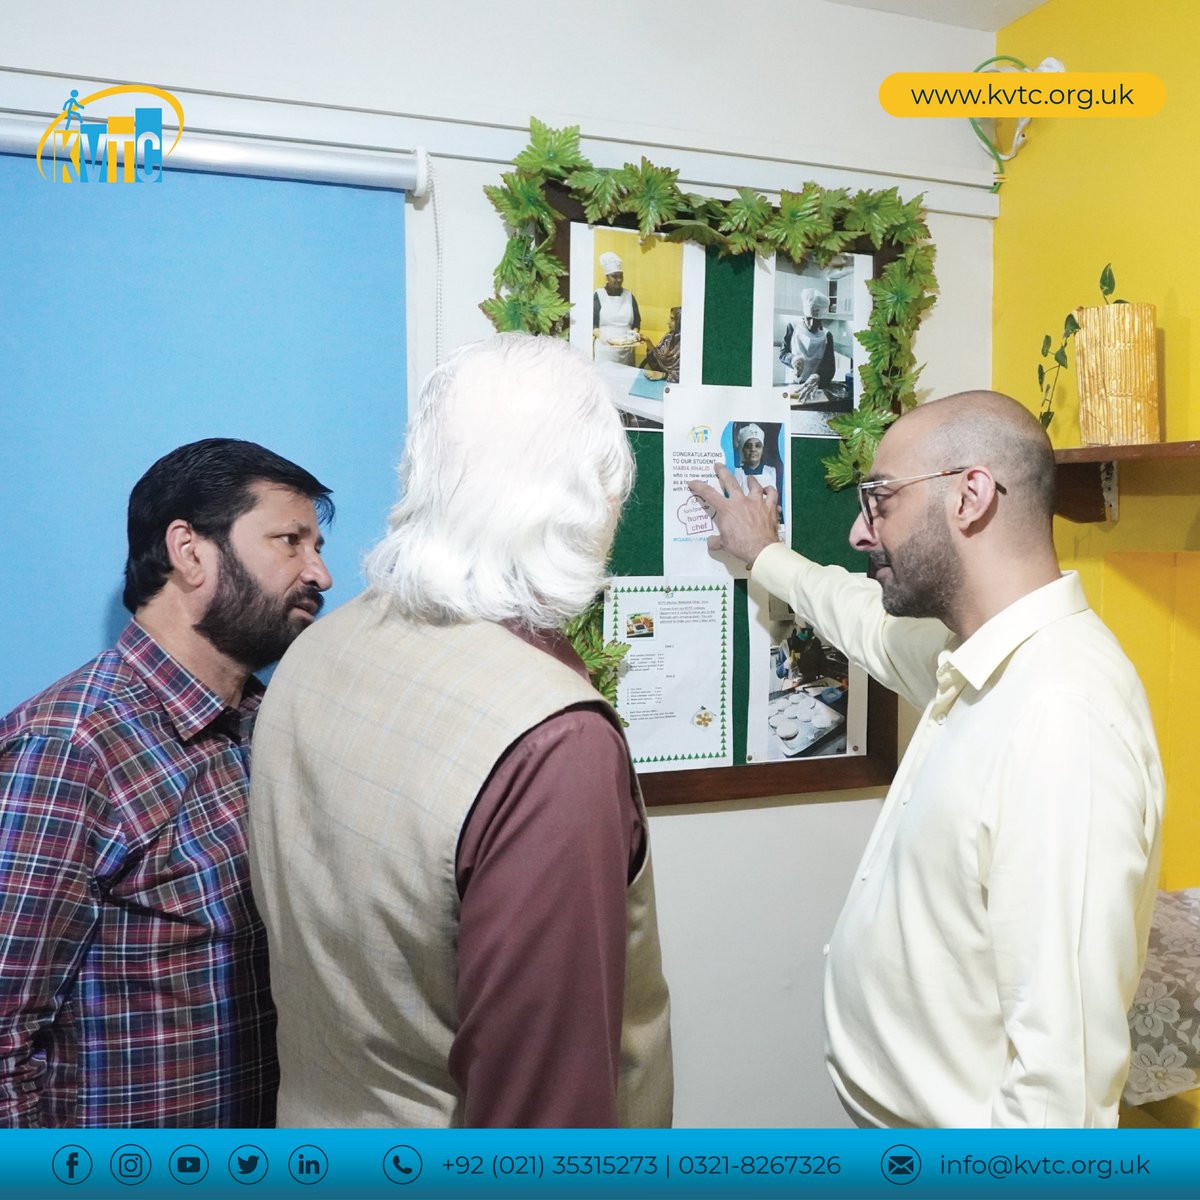 Mr. Zain Bashir, Vice Chairman at @gulahmedfashion also visited the Jiddat Outlet and appreciated the quality of the products.

#KVTC #GulAhmed #QabilHaiPakistan #ZainBashir #differentlyabled #skillstraining #therapies #rehabilitationcenter #karachi #downsyndrome #specialneeds